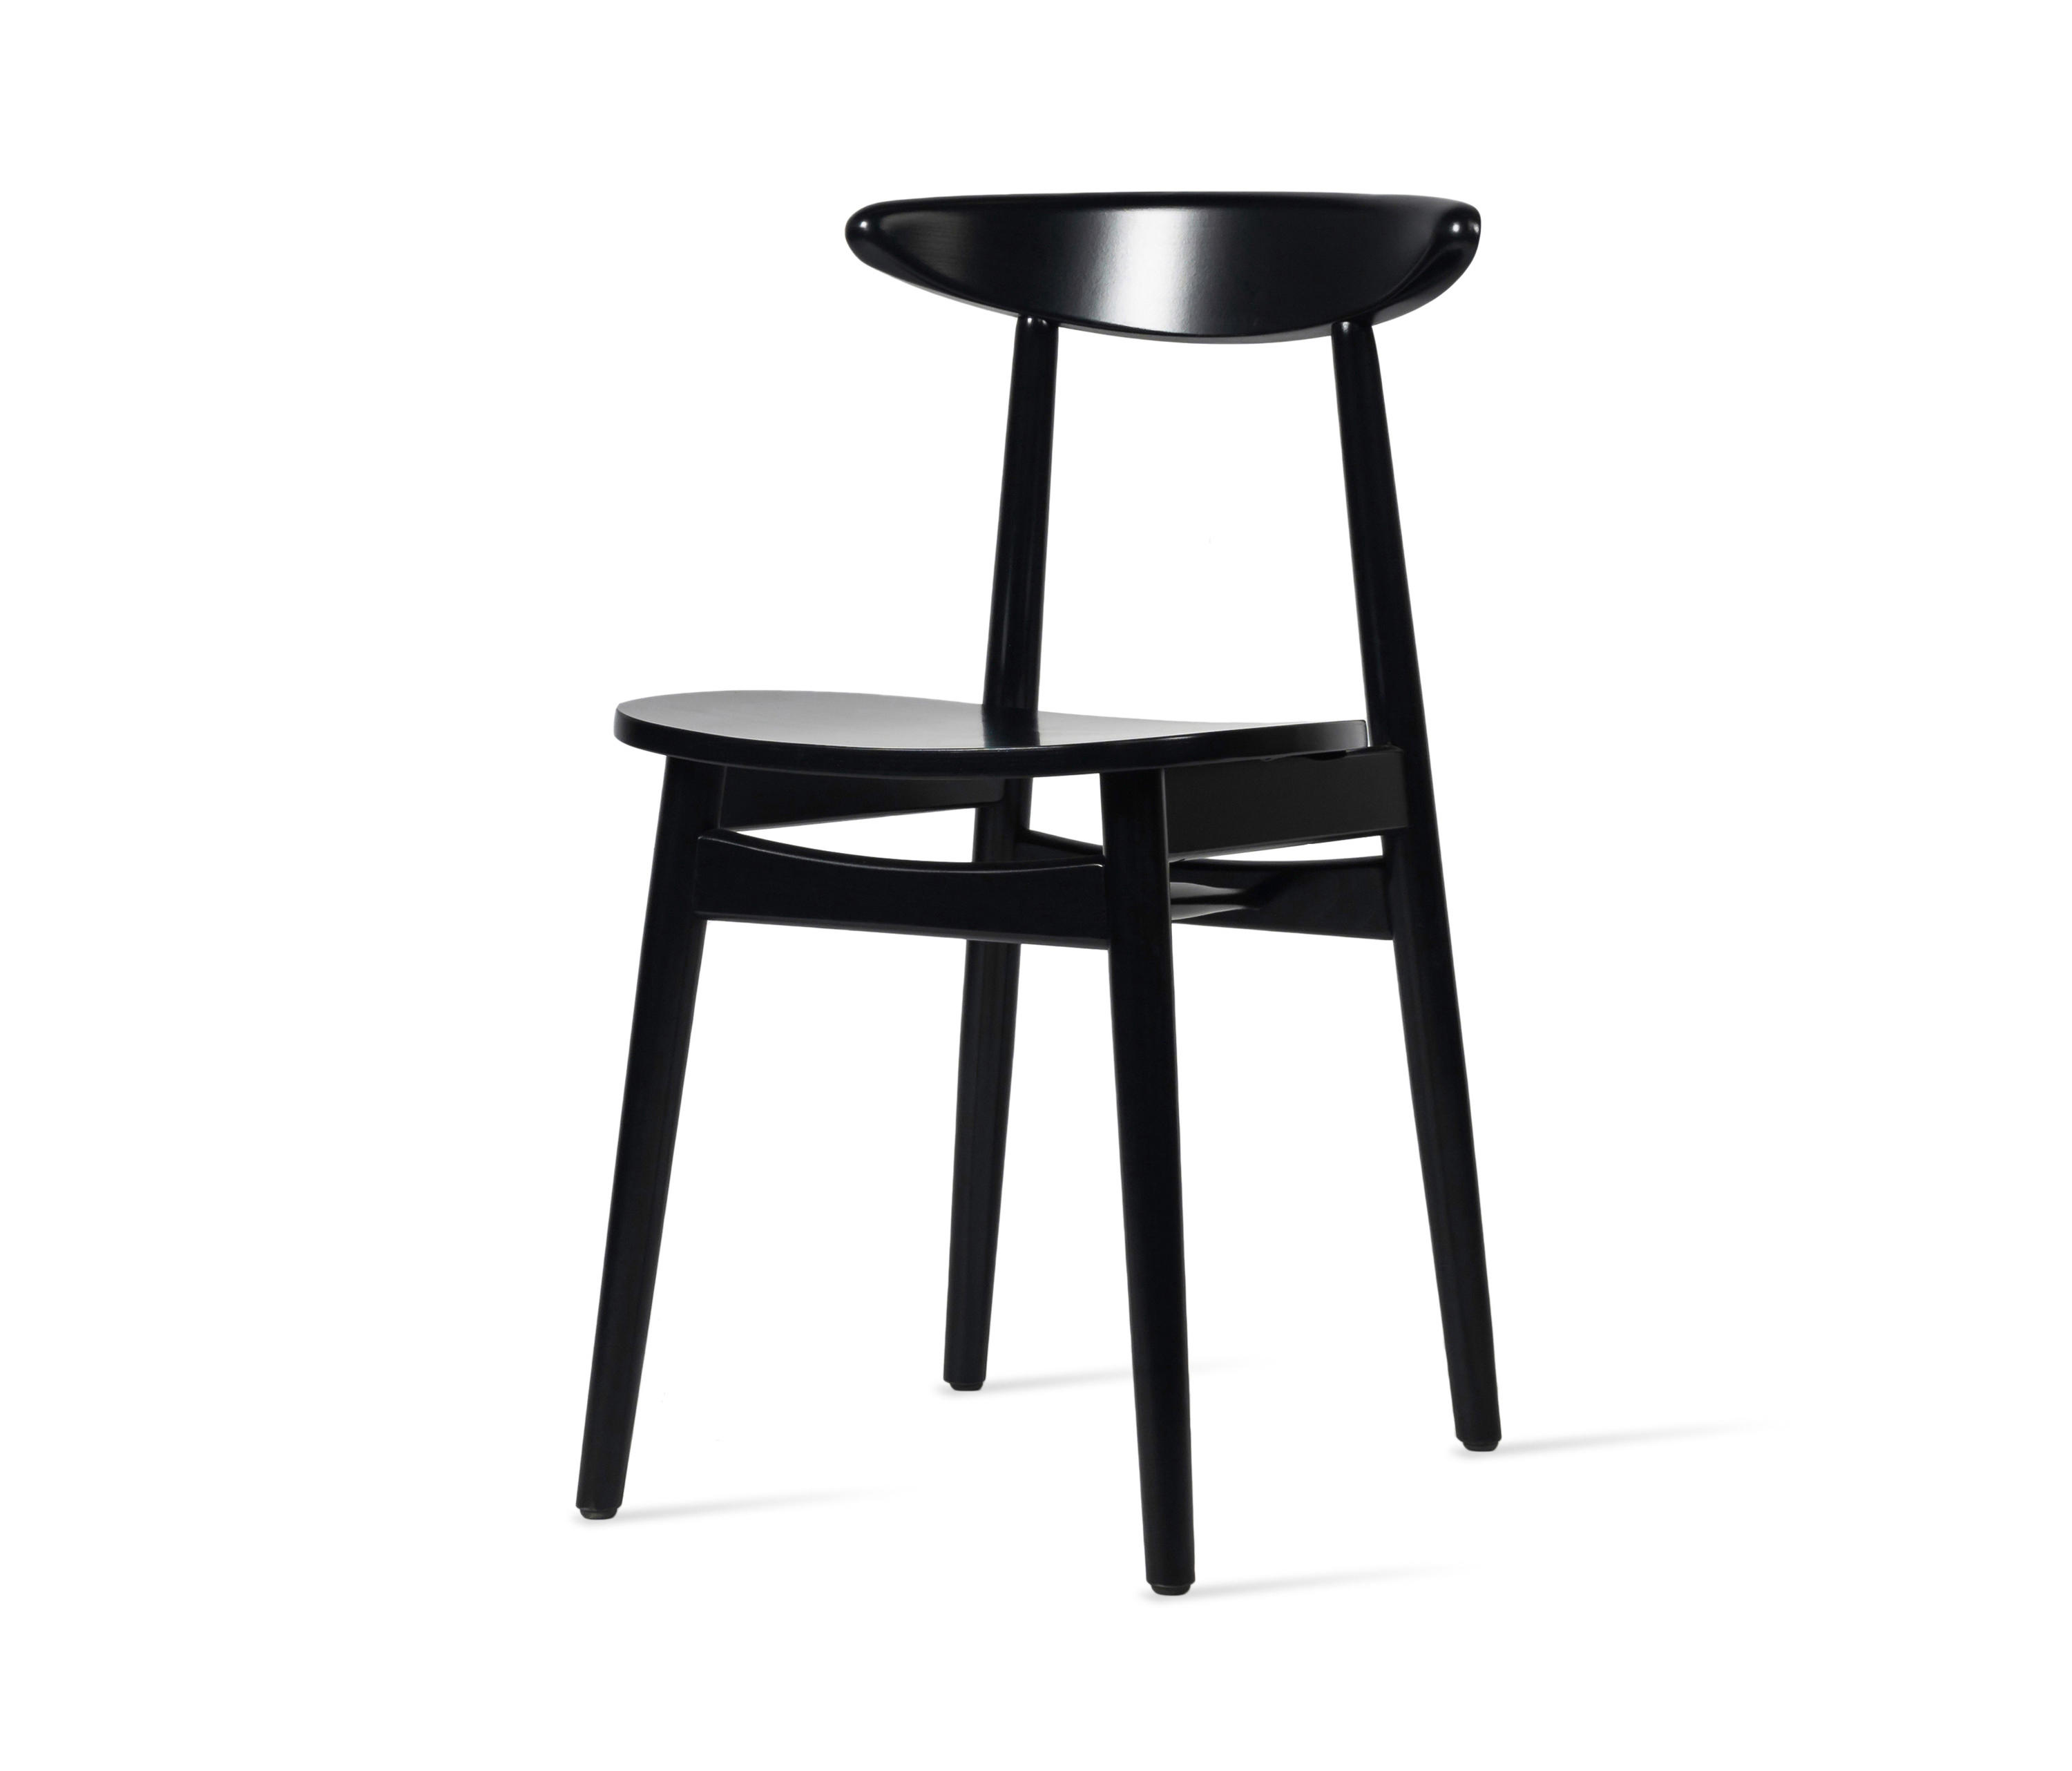 Atelier N/7 Teo dining chair | Architonic